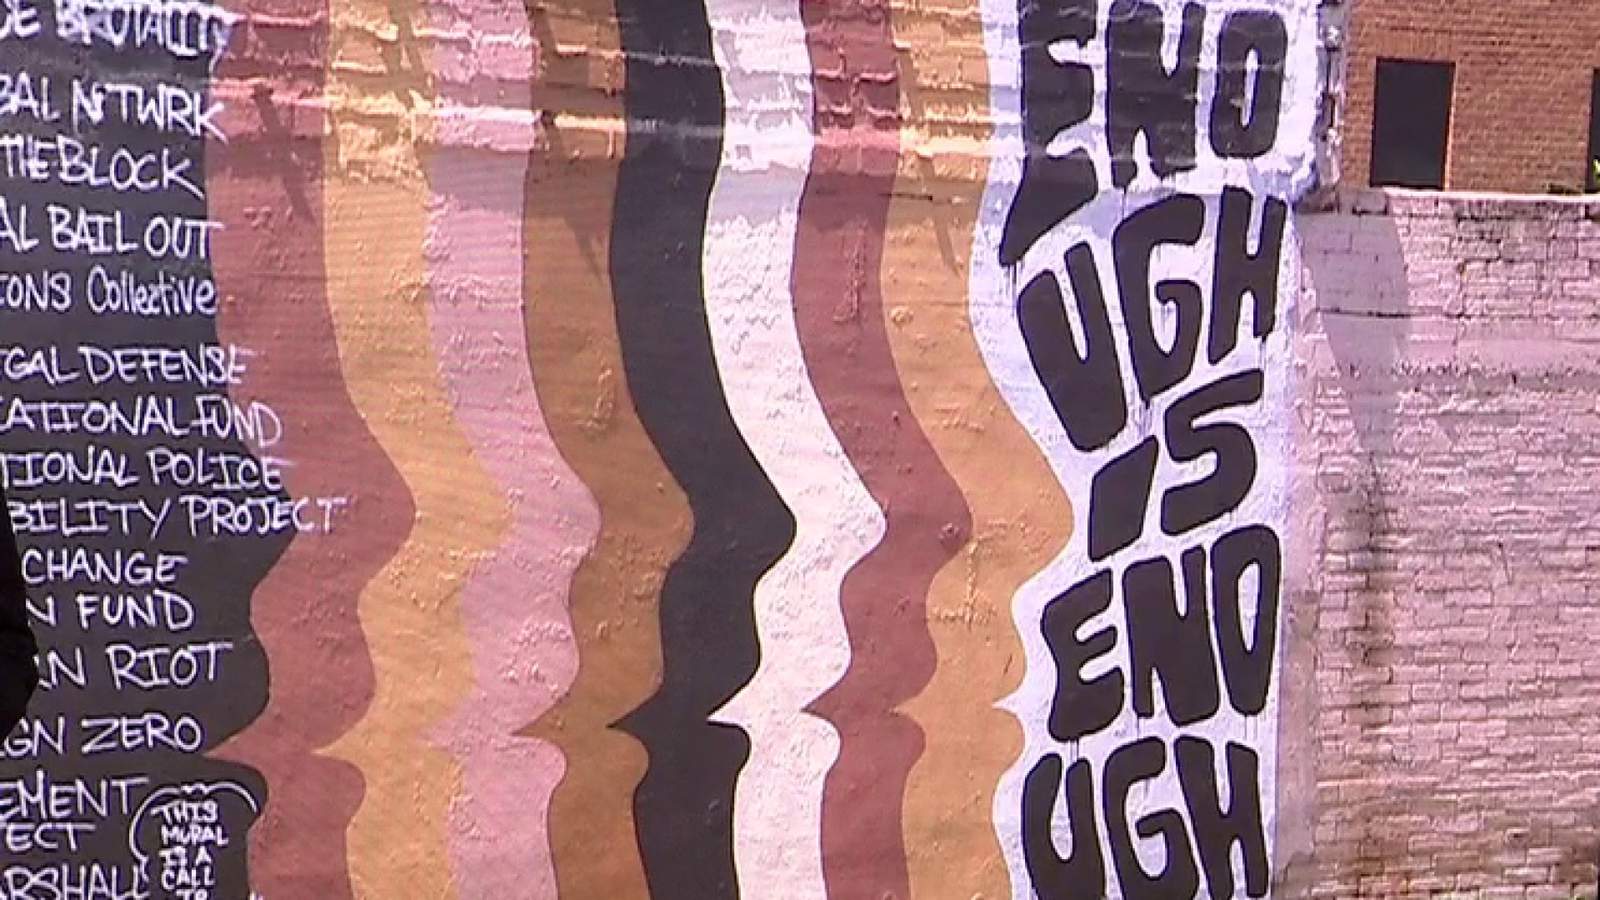 Artist discusses inspiration behind recent new anti-racism mural near downtown San Antonio